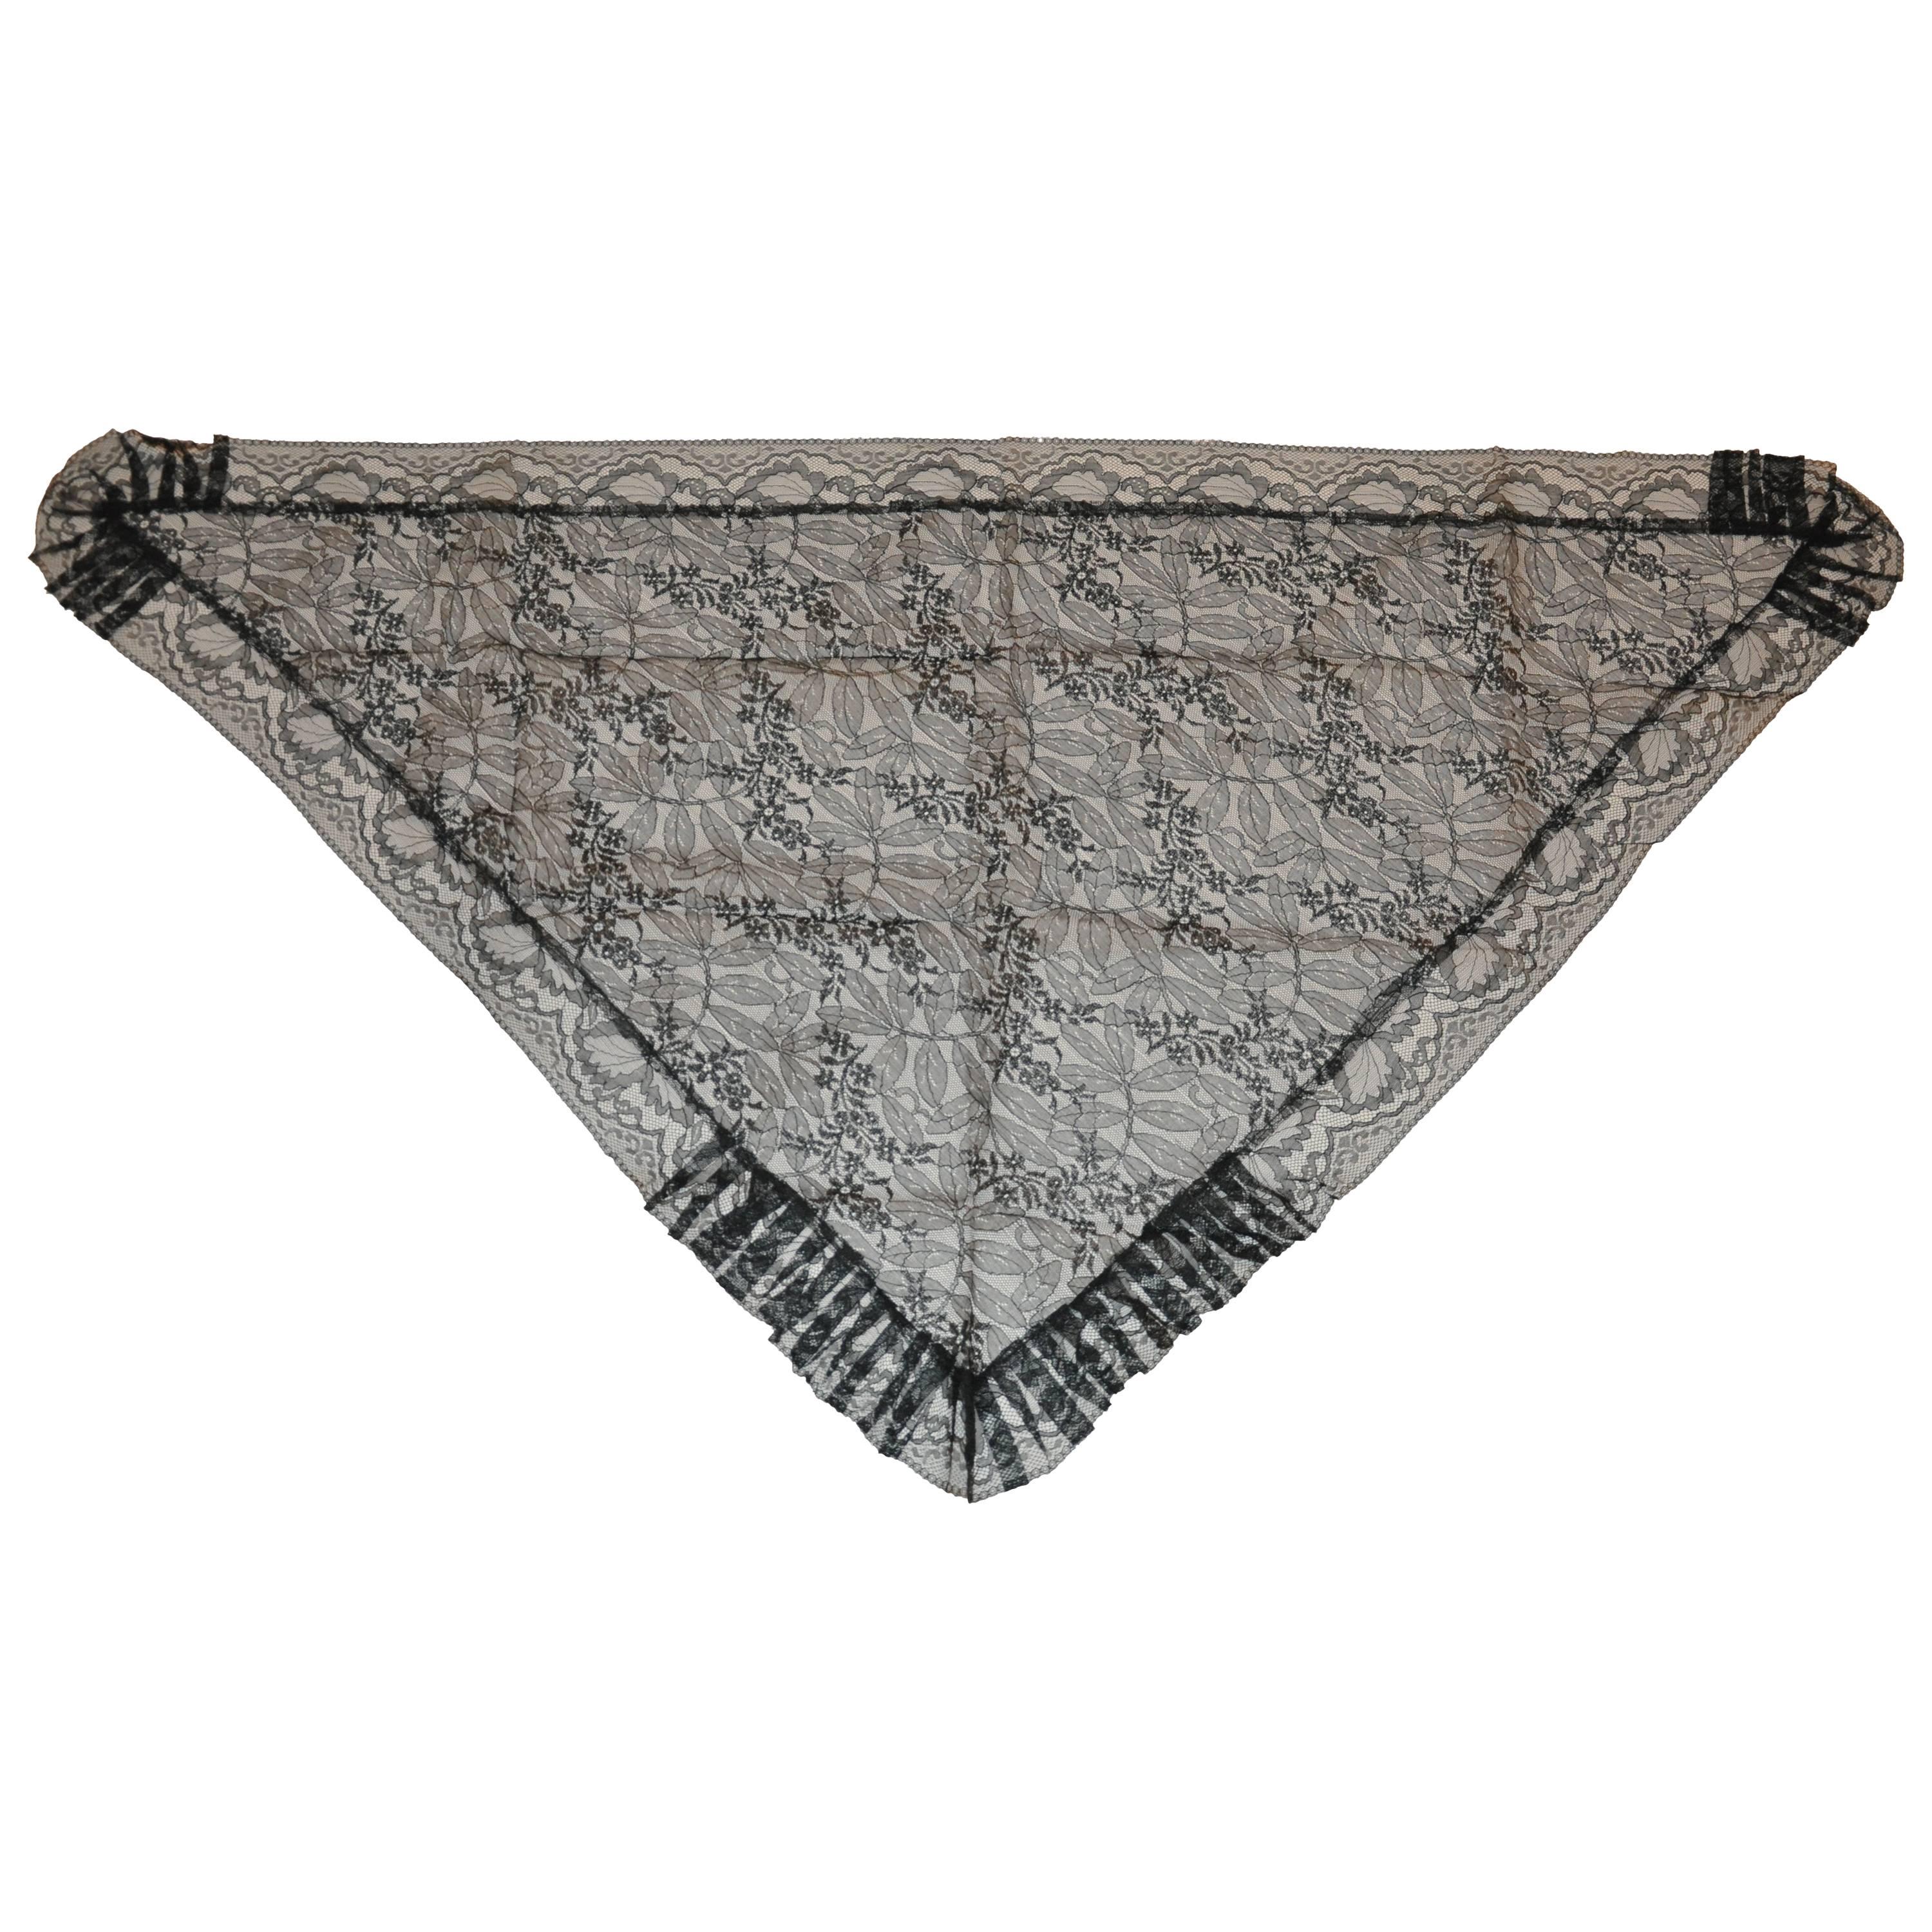 Black Swiss Lace "Widow" with Pleated Borders" Scarf For Sale